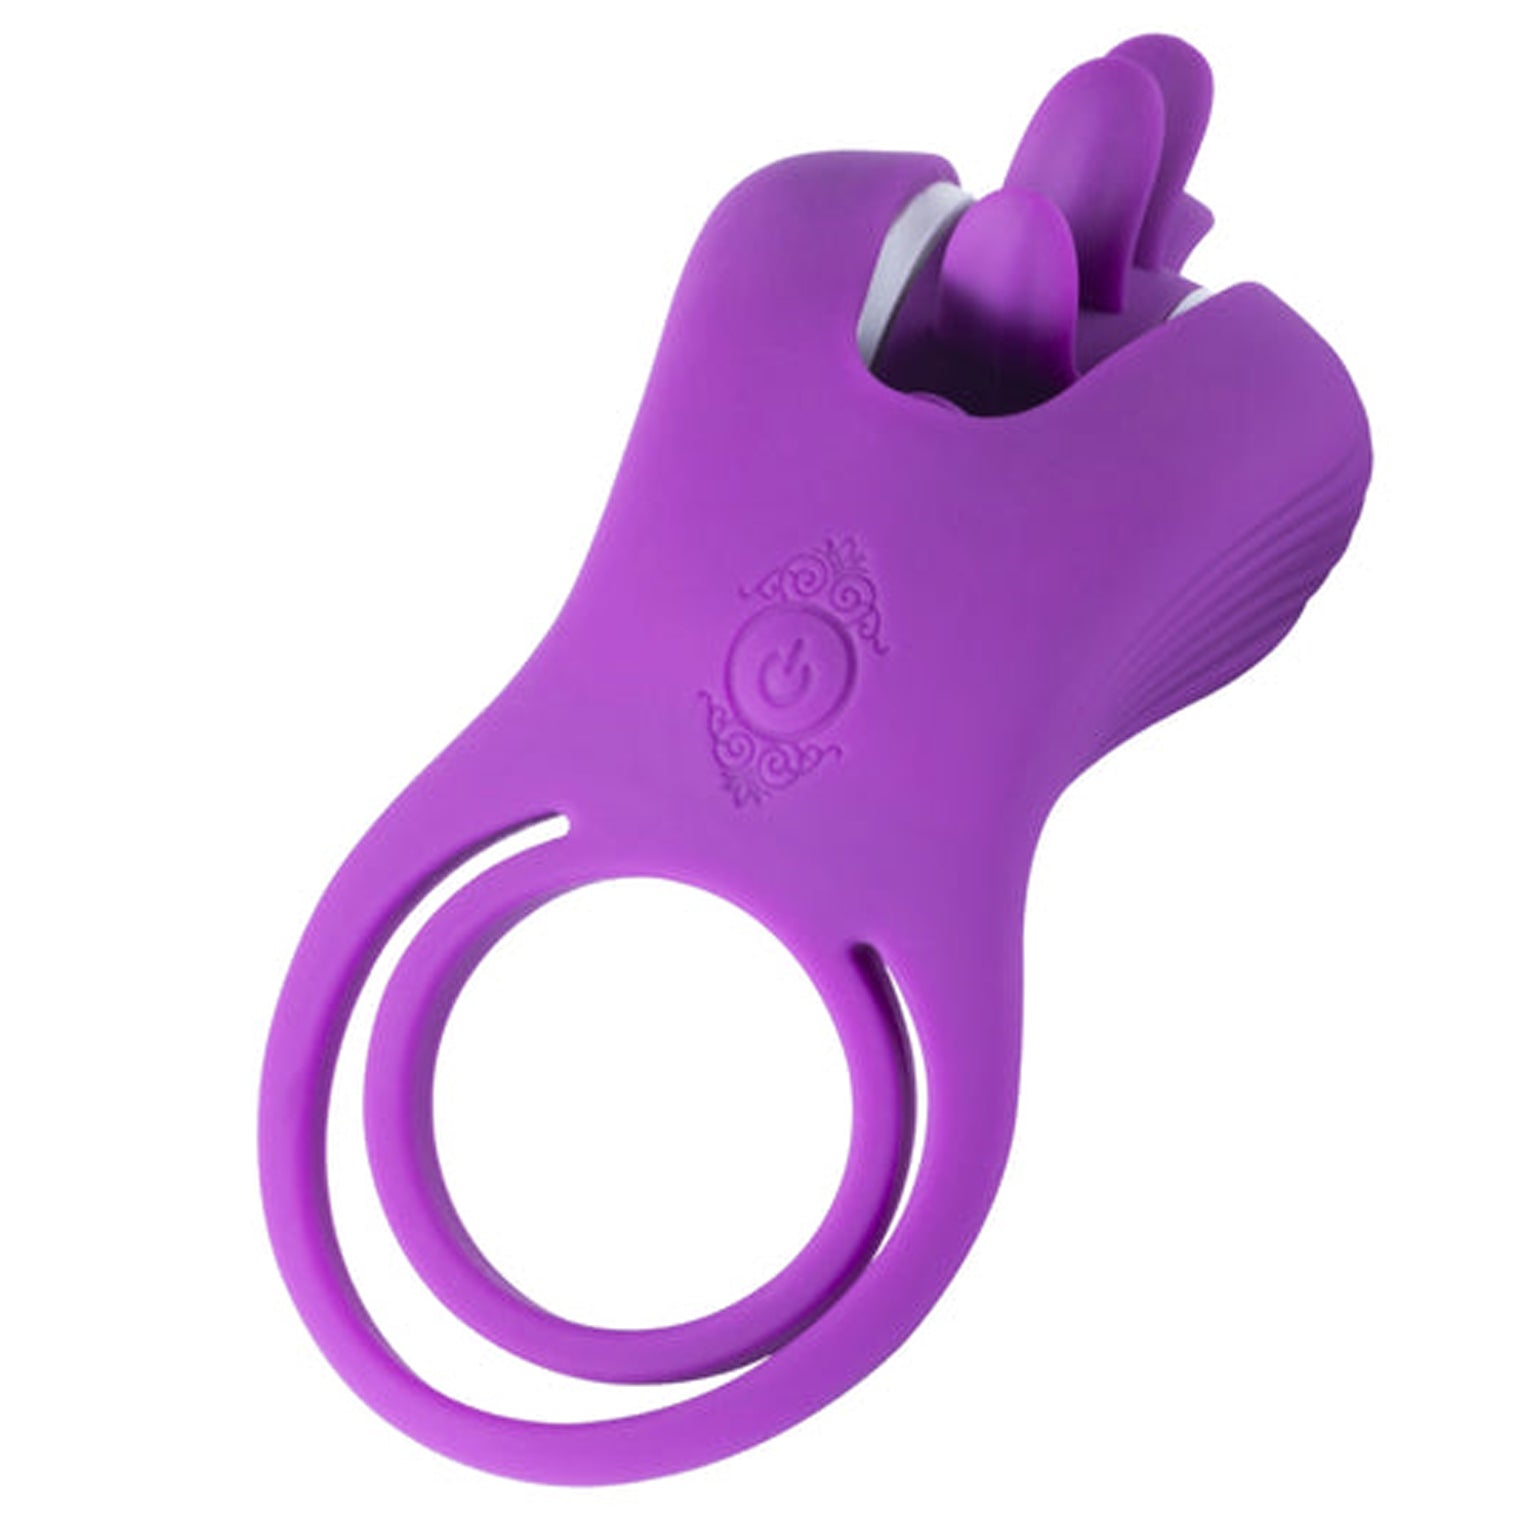 Roxy - Tongue Clit Licker and Cock Ring - Purple-3